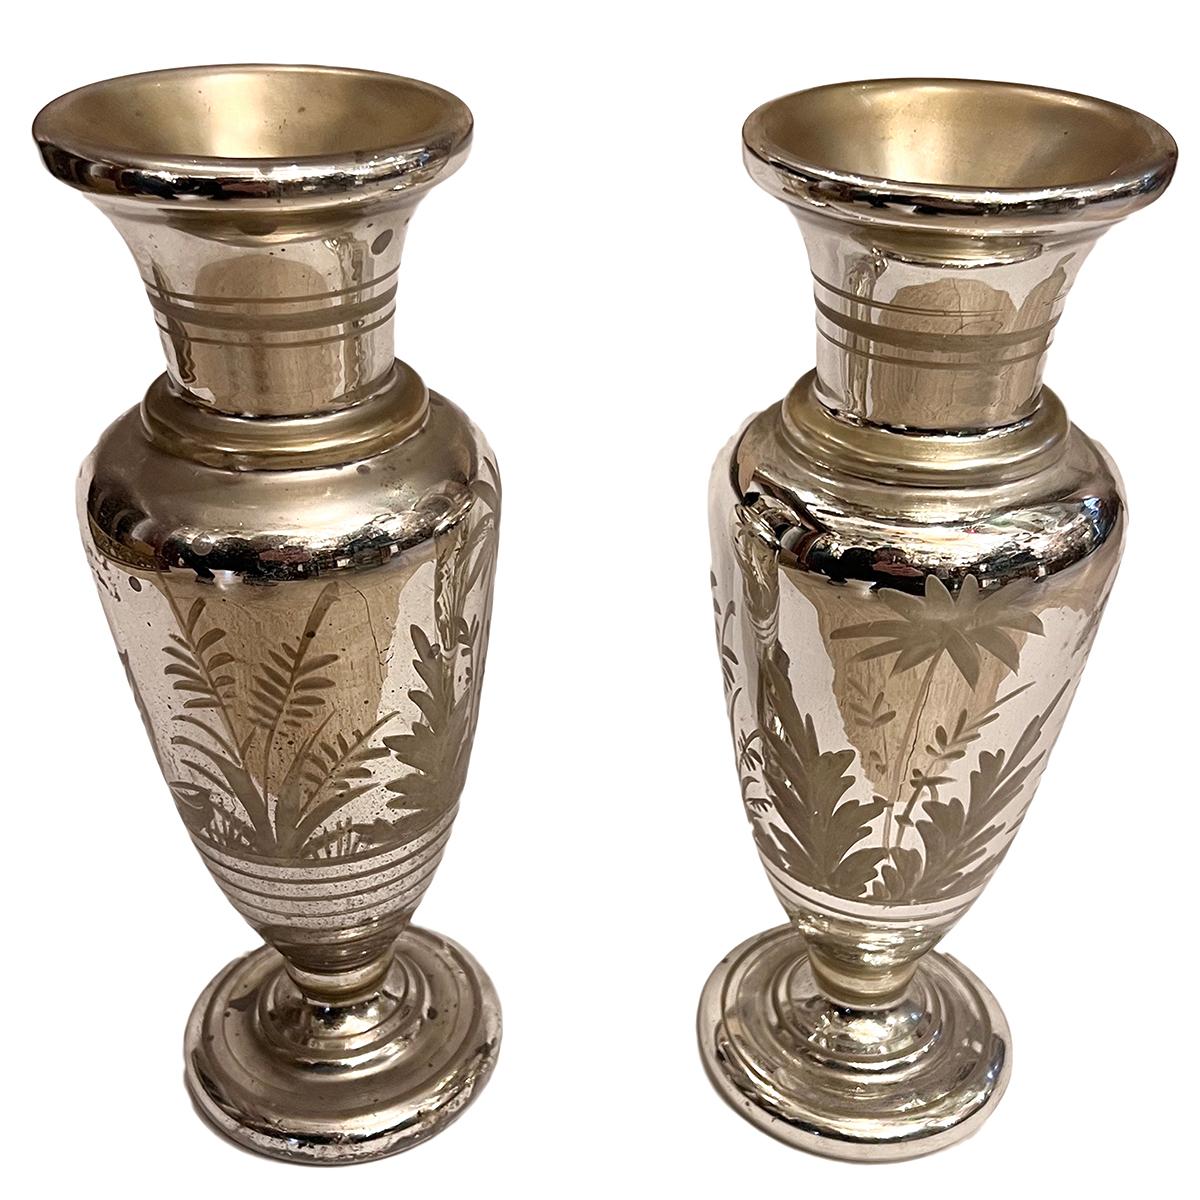 Pair of circa 1920's French etched mercury glass vases. Sold as pair.

Measurements:
Height: 12.5